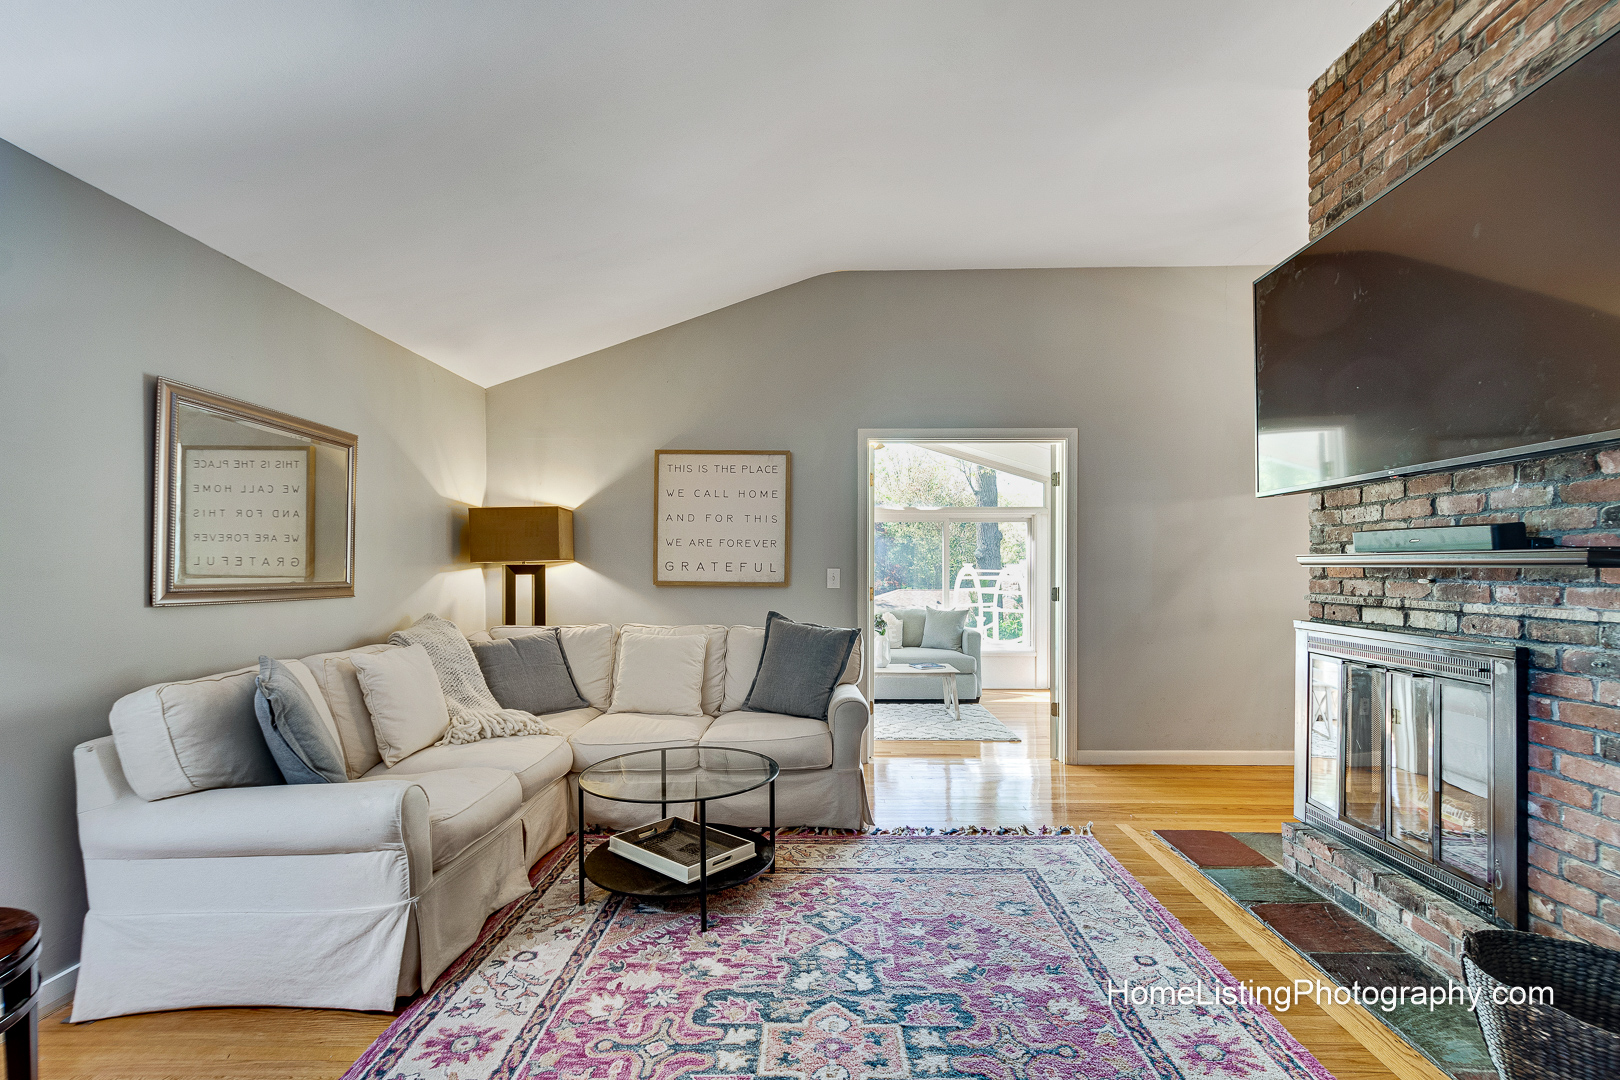 Thomas Adach - Norwood MA professional real estate photographer - 508-655-2225 Home Listing Photography